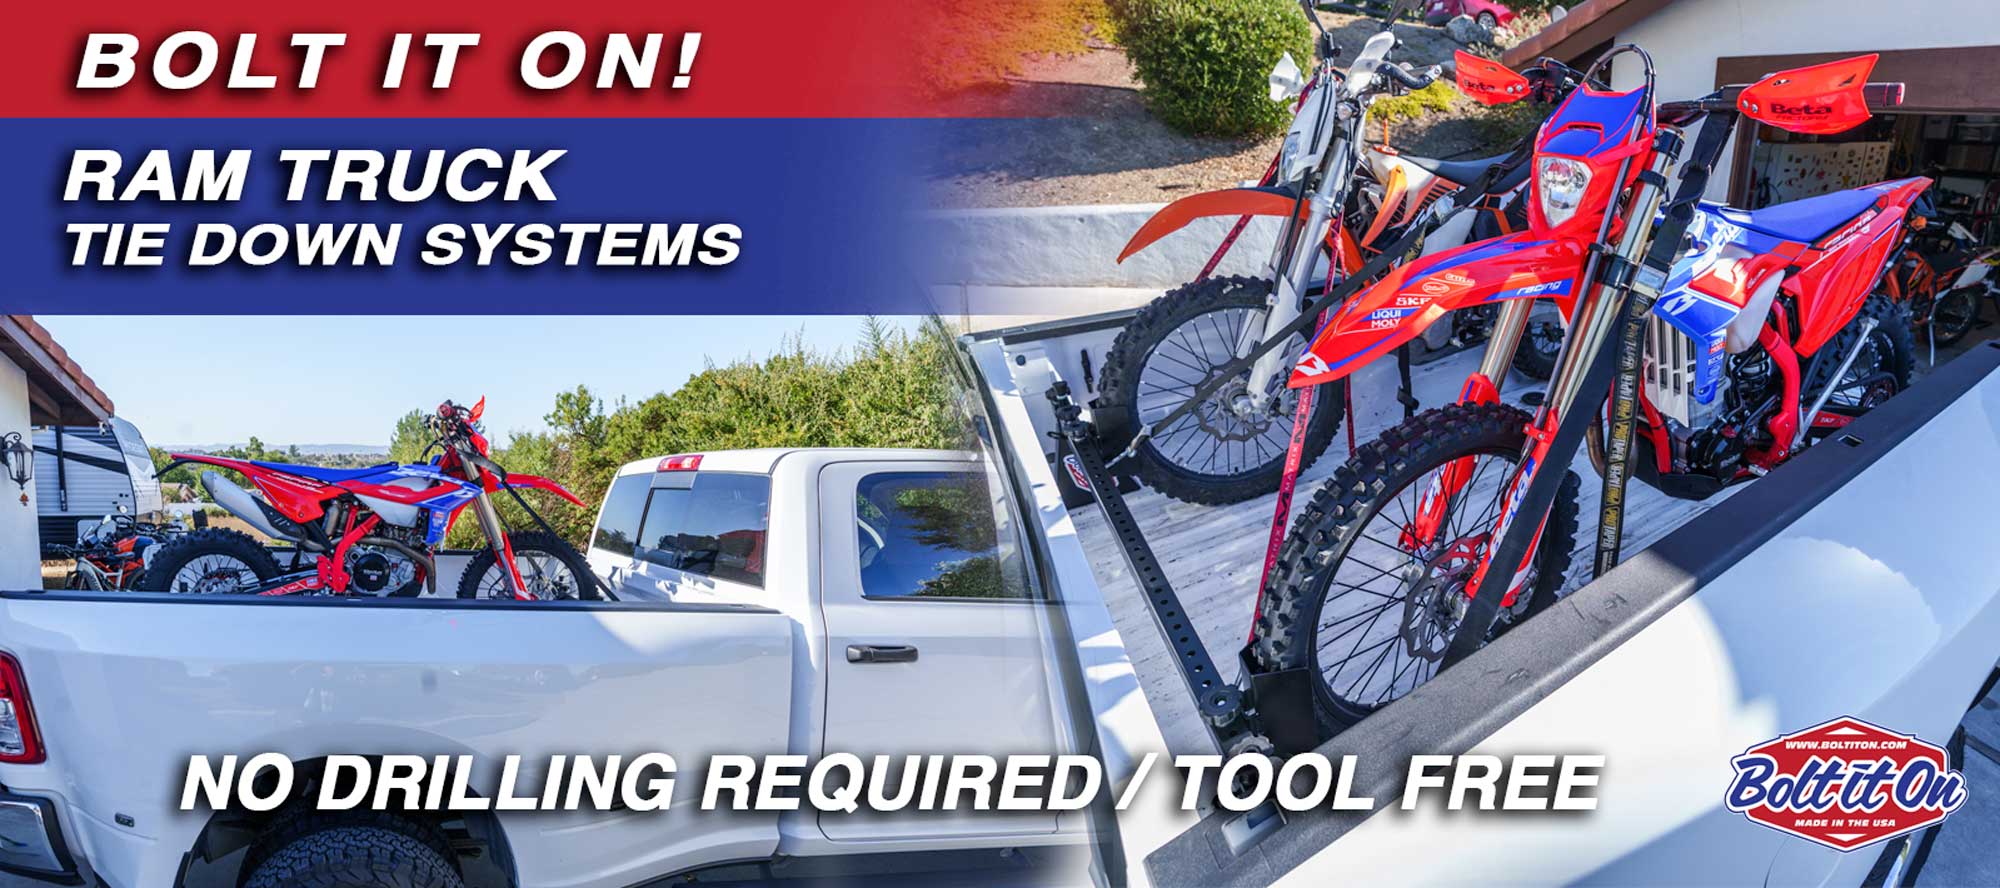 The #1 Tool-Free Motorcycle and Bicycle Tie Down System Since 2006